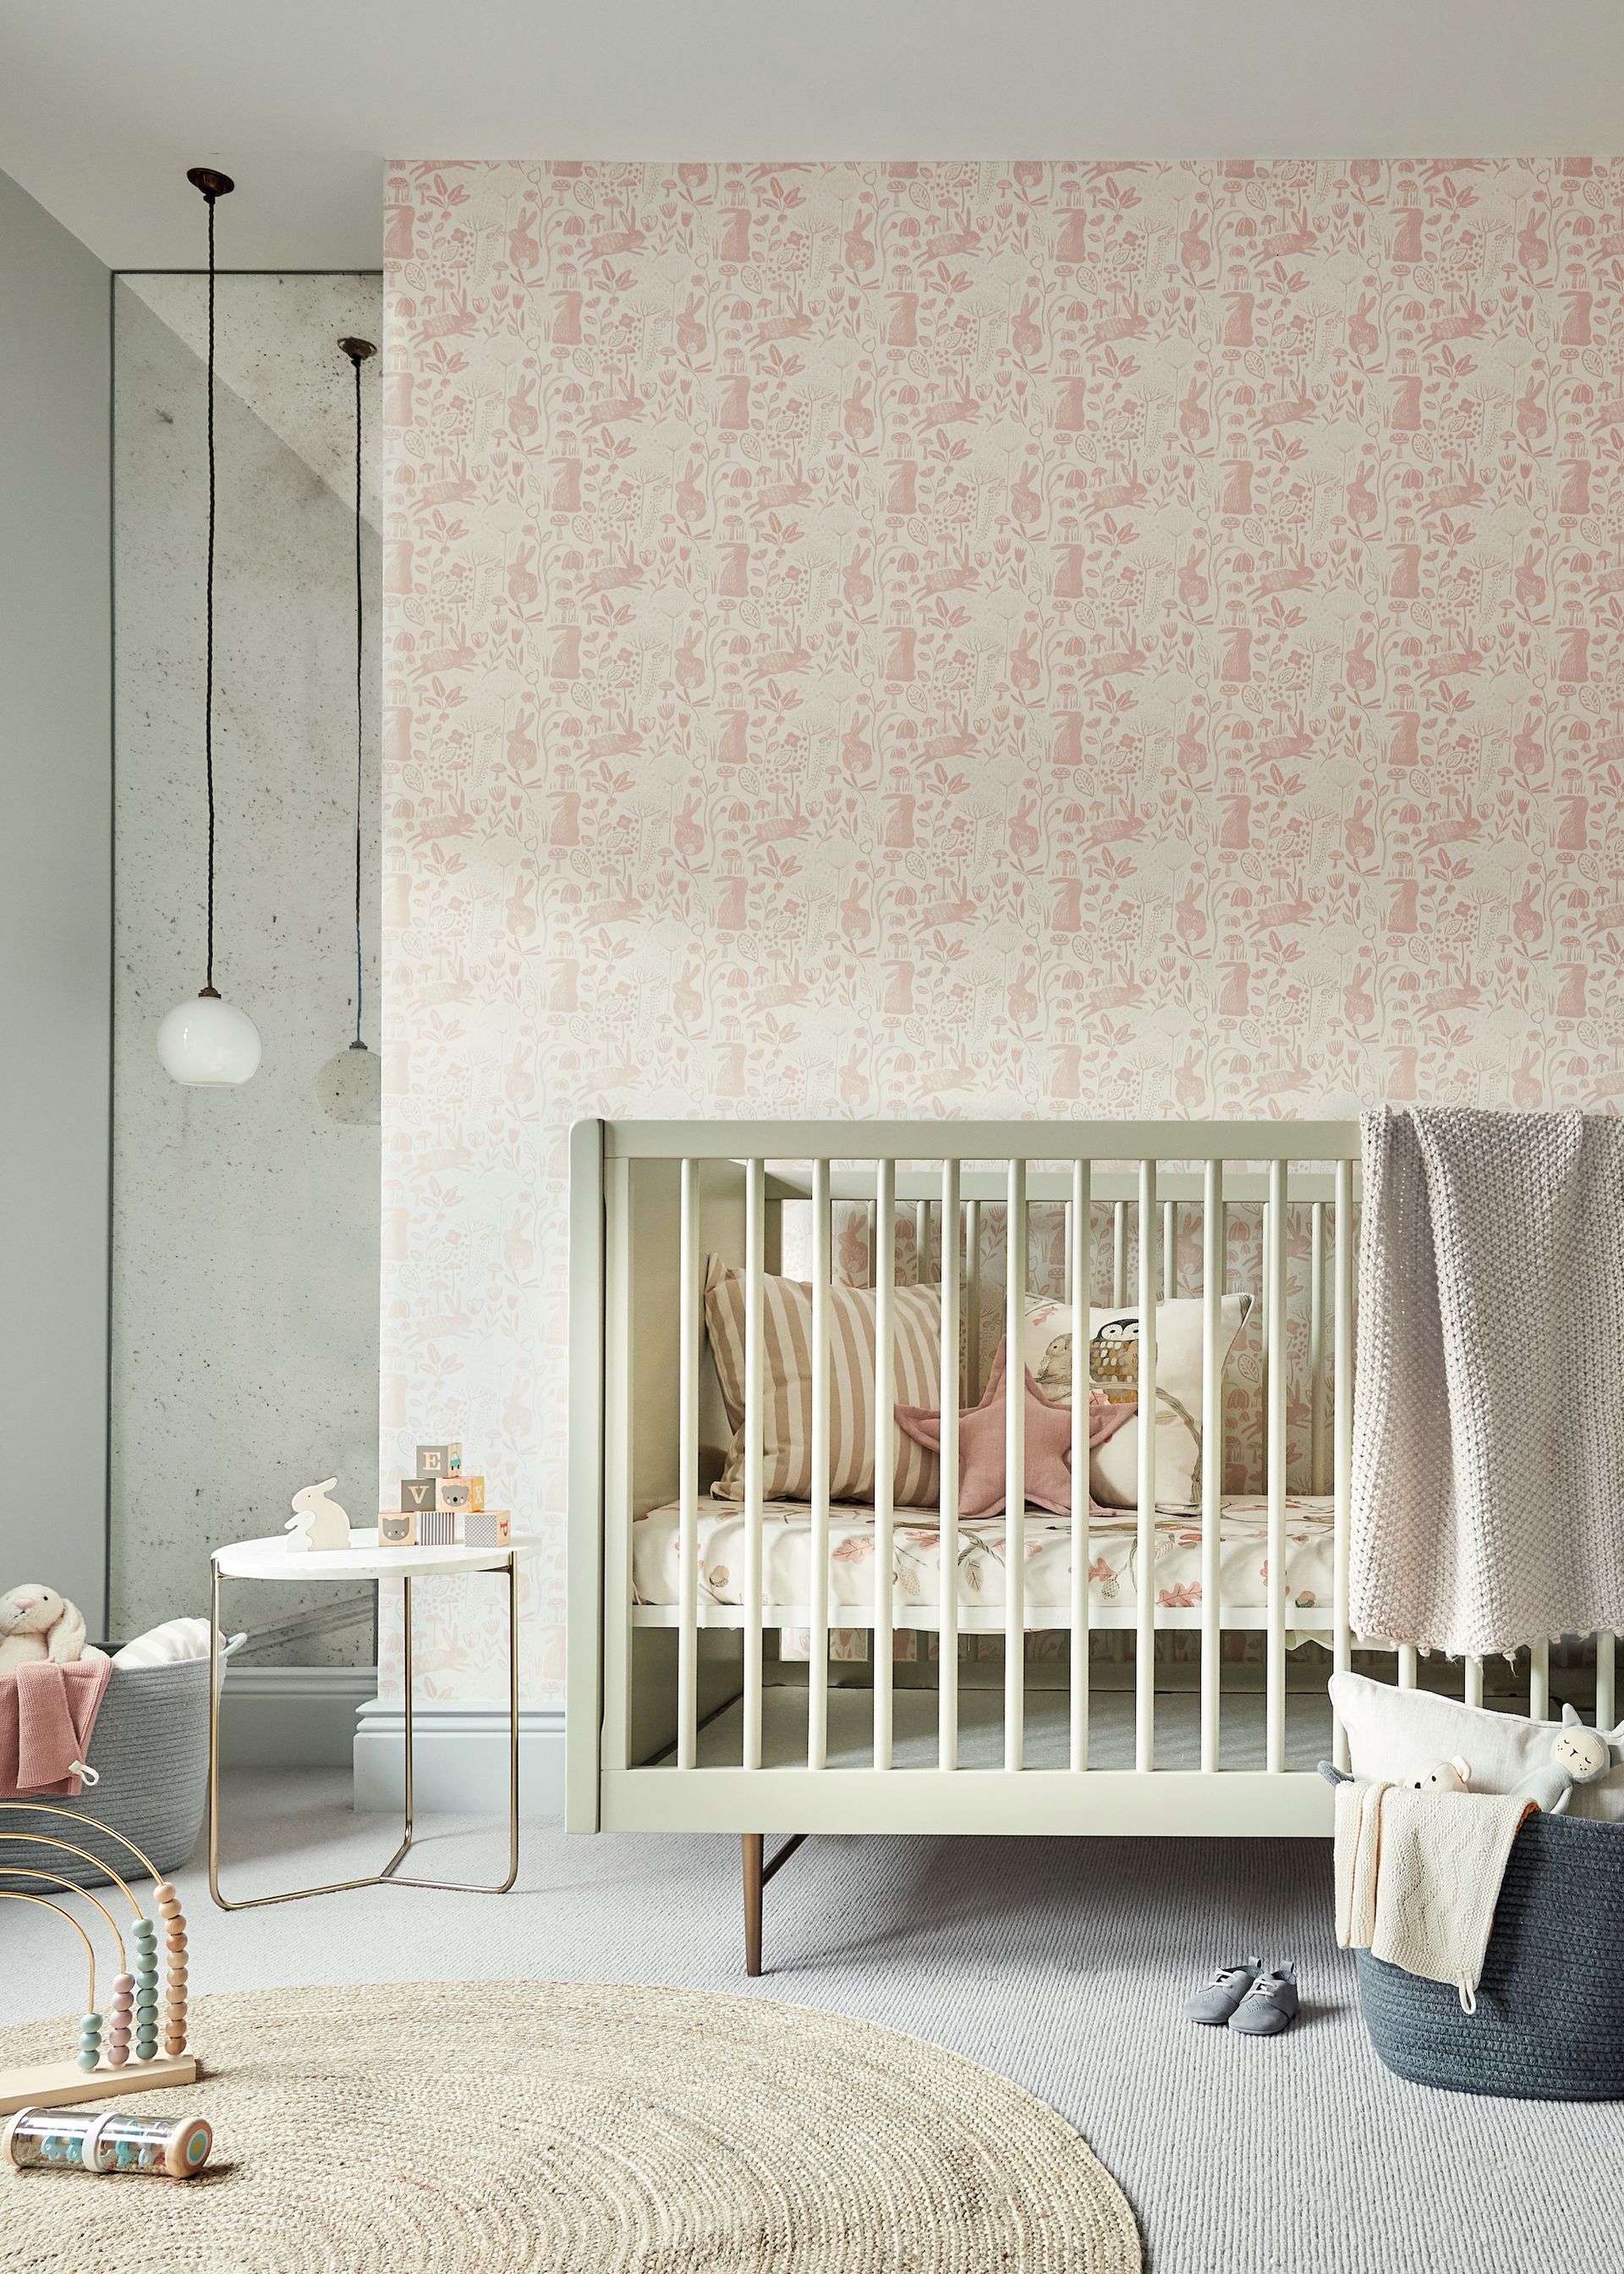 <p>                     Soft and creamy tones of pink are surprisingly complex and add areas of interest while still being easy to live with. They are calming and cocooning, and will give any space character while also adding an unexpectedly fresh feel.                   </p>                                      <p>                     Baby pink works well with cool neutrals, such as brilliant whites and all tones of grey, from light to moody. The choice depends on what type of look you’d like to create – bold and dramatic or cool and restful.                   </p>                                      <p>                     'When we think of pastels it's ice cream shades that pop into our heads, but they can be much more subtle than that,' says Jennifer Ebert, digital editor, Homes & Gardens. 'This charming baby girl nursery has subtle tones of pastel pink and green with a couple of shades of grey. The result is a perfectly balanced scheme that's very restful.'                   </p>